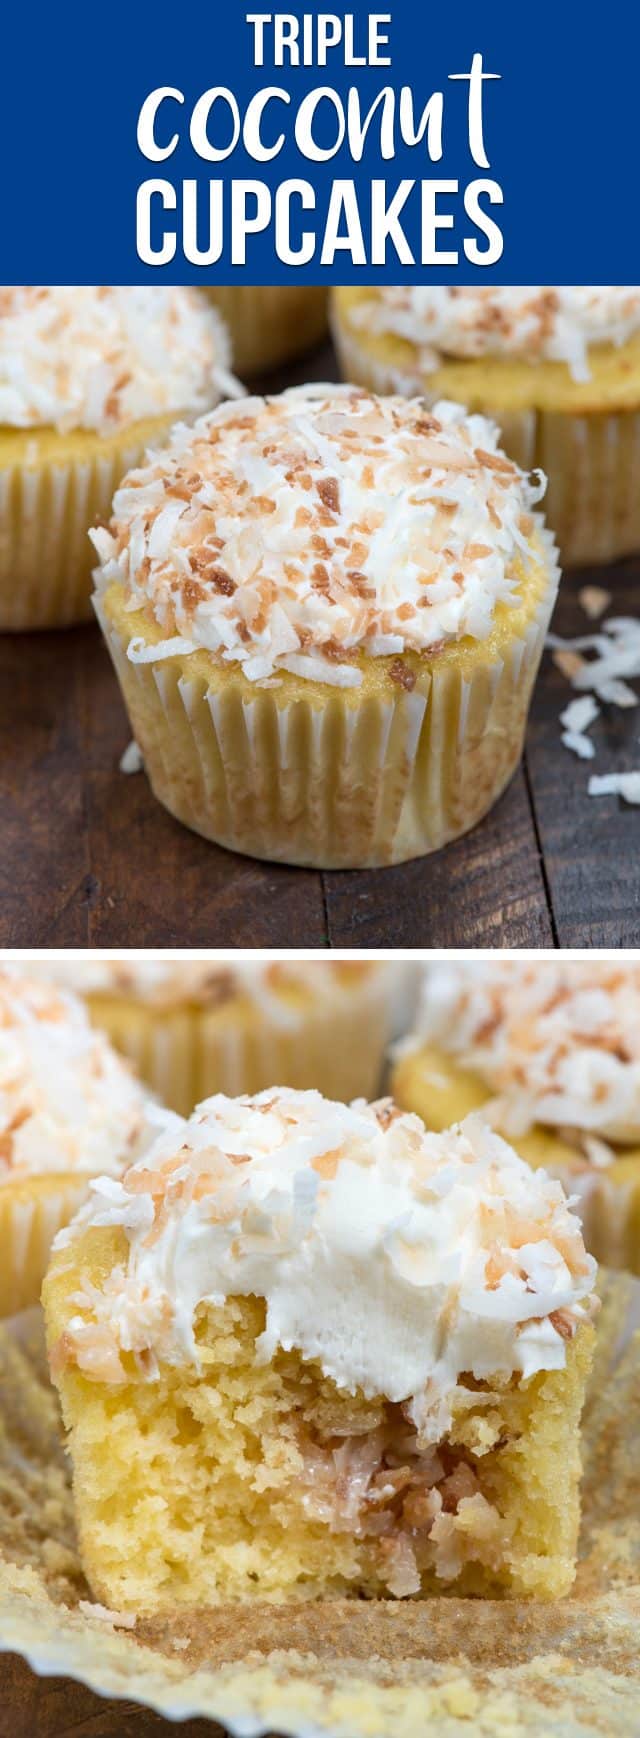 collage of triple coconut cupcakes